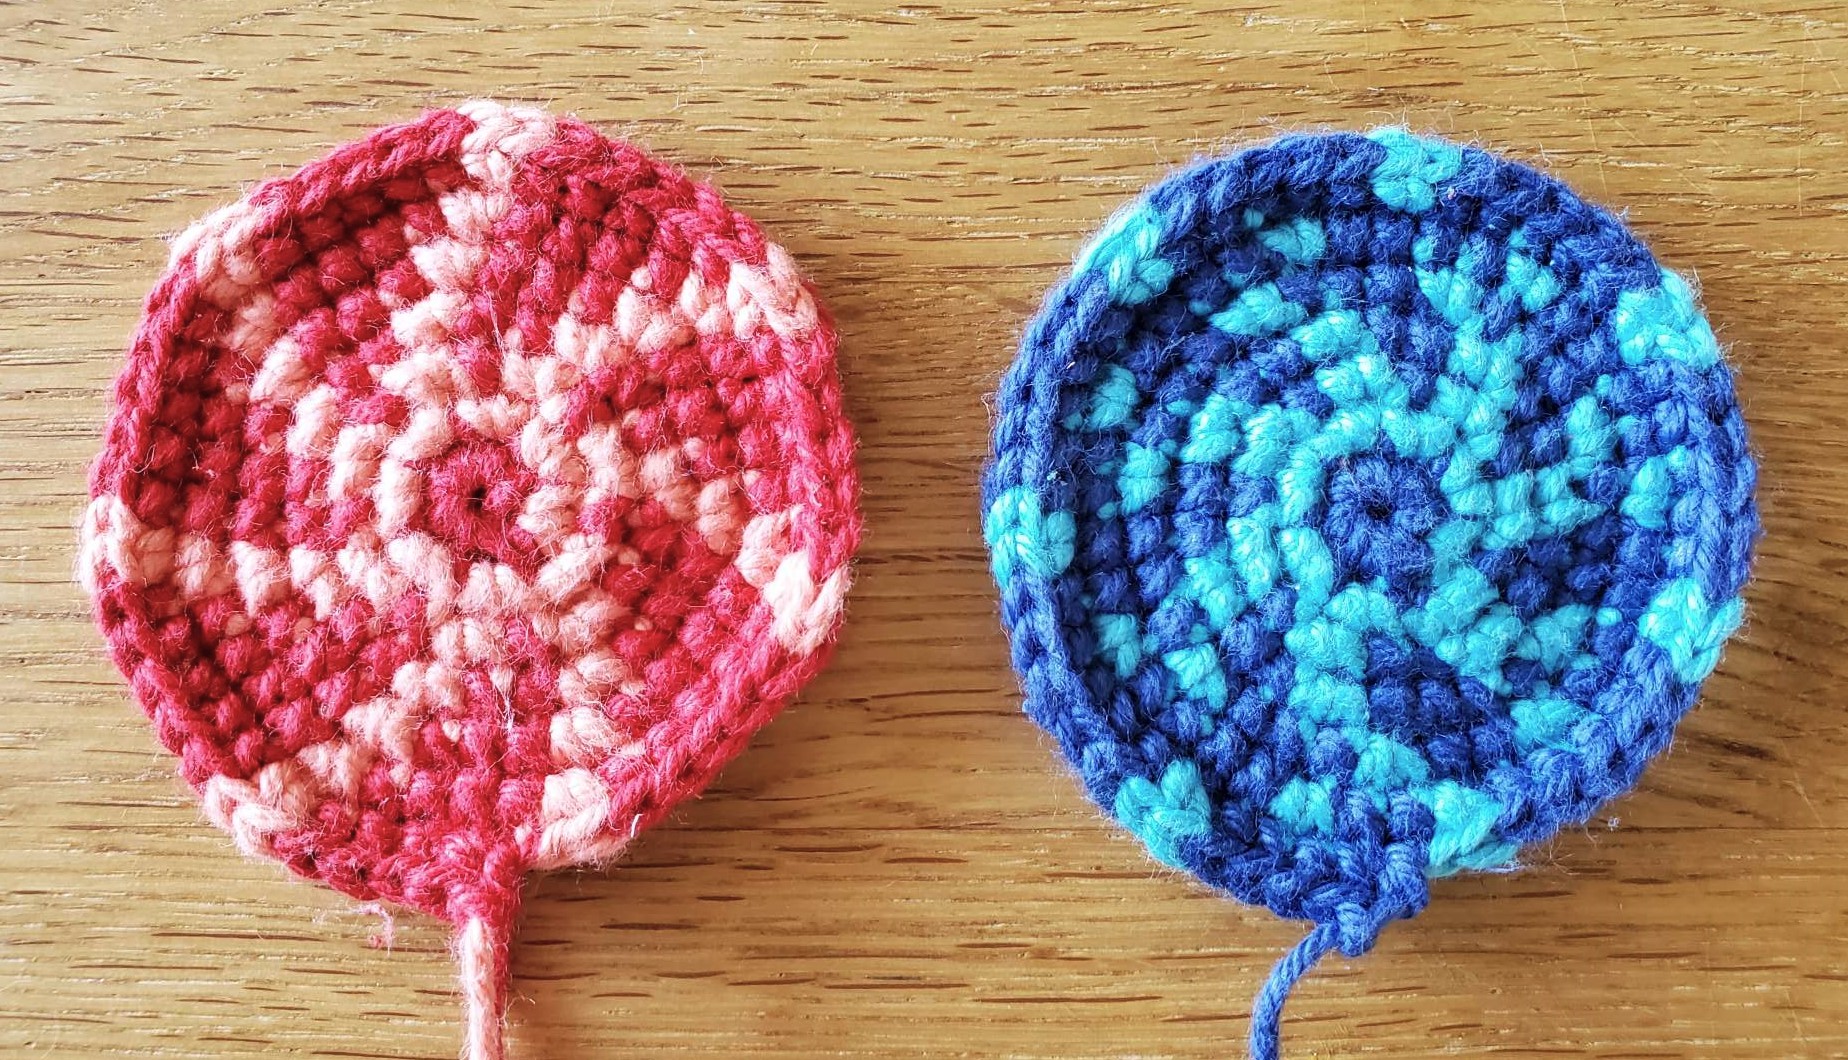 circles crocheted with stacked versus scattered increases